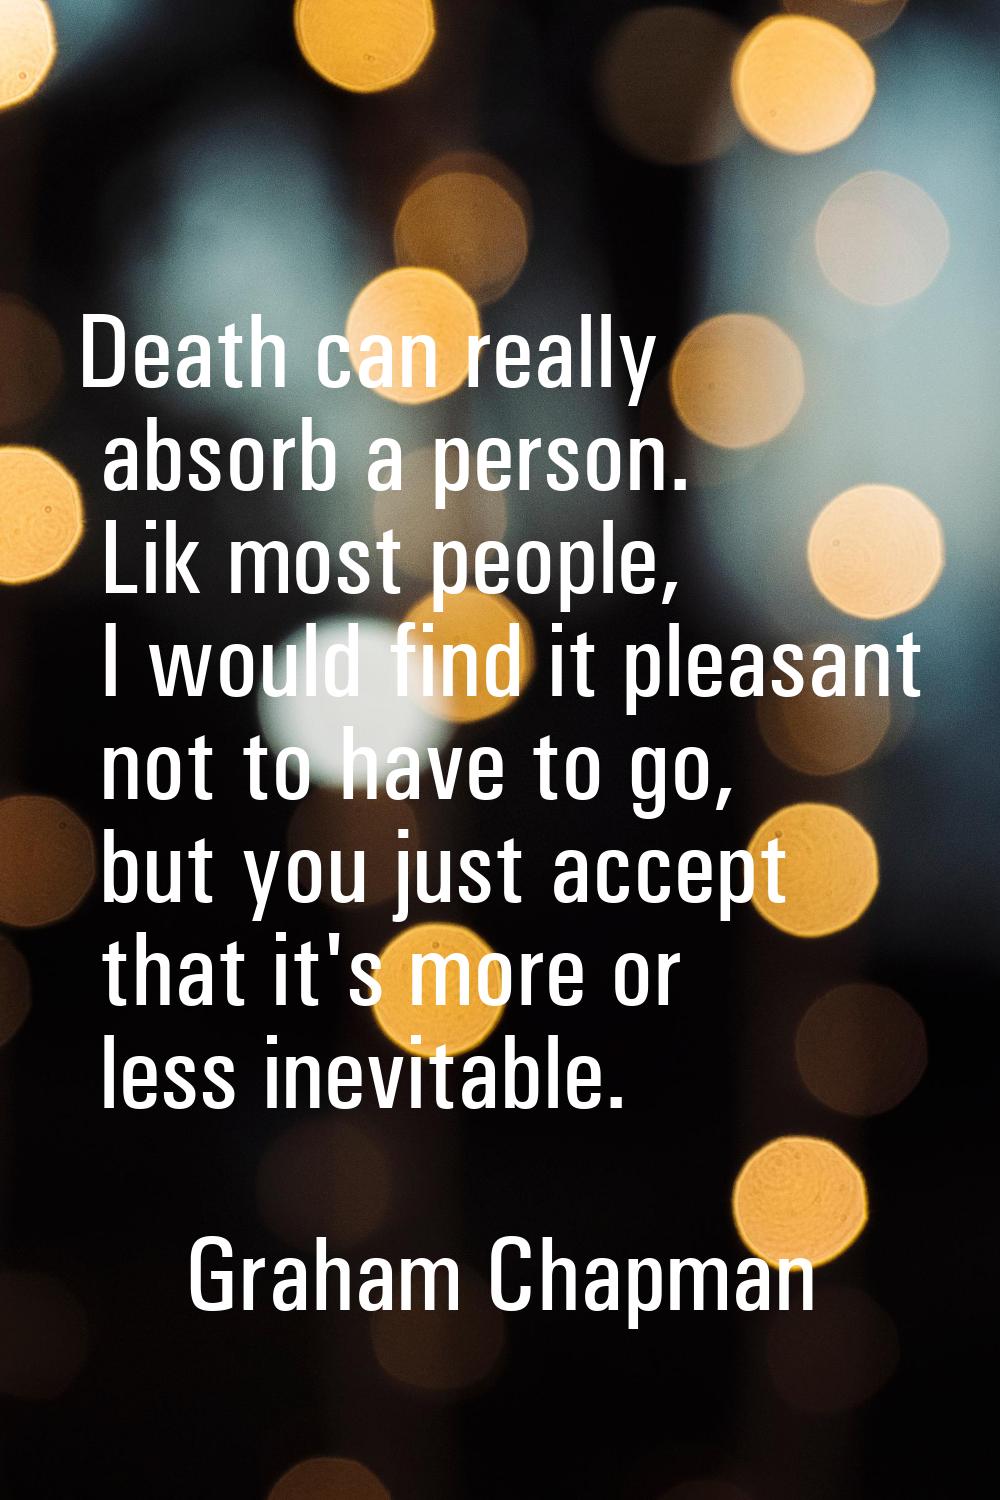 Death can really absorb a person. Lik most people, I would find it pleasant not to have to go, but 